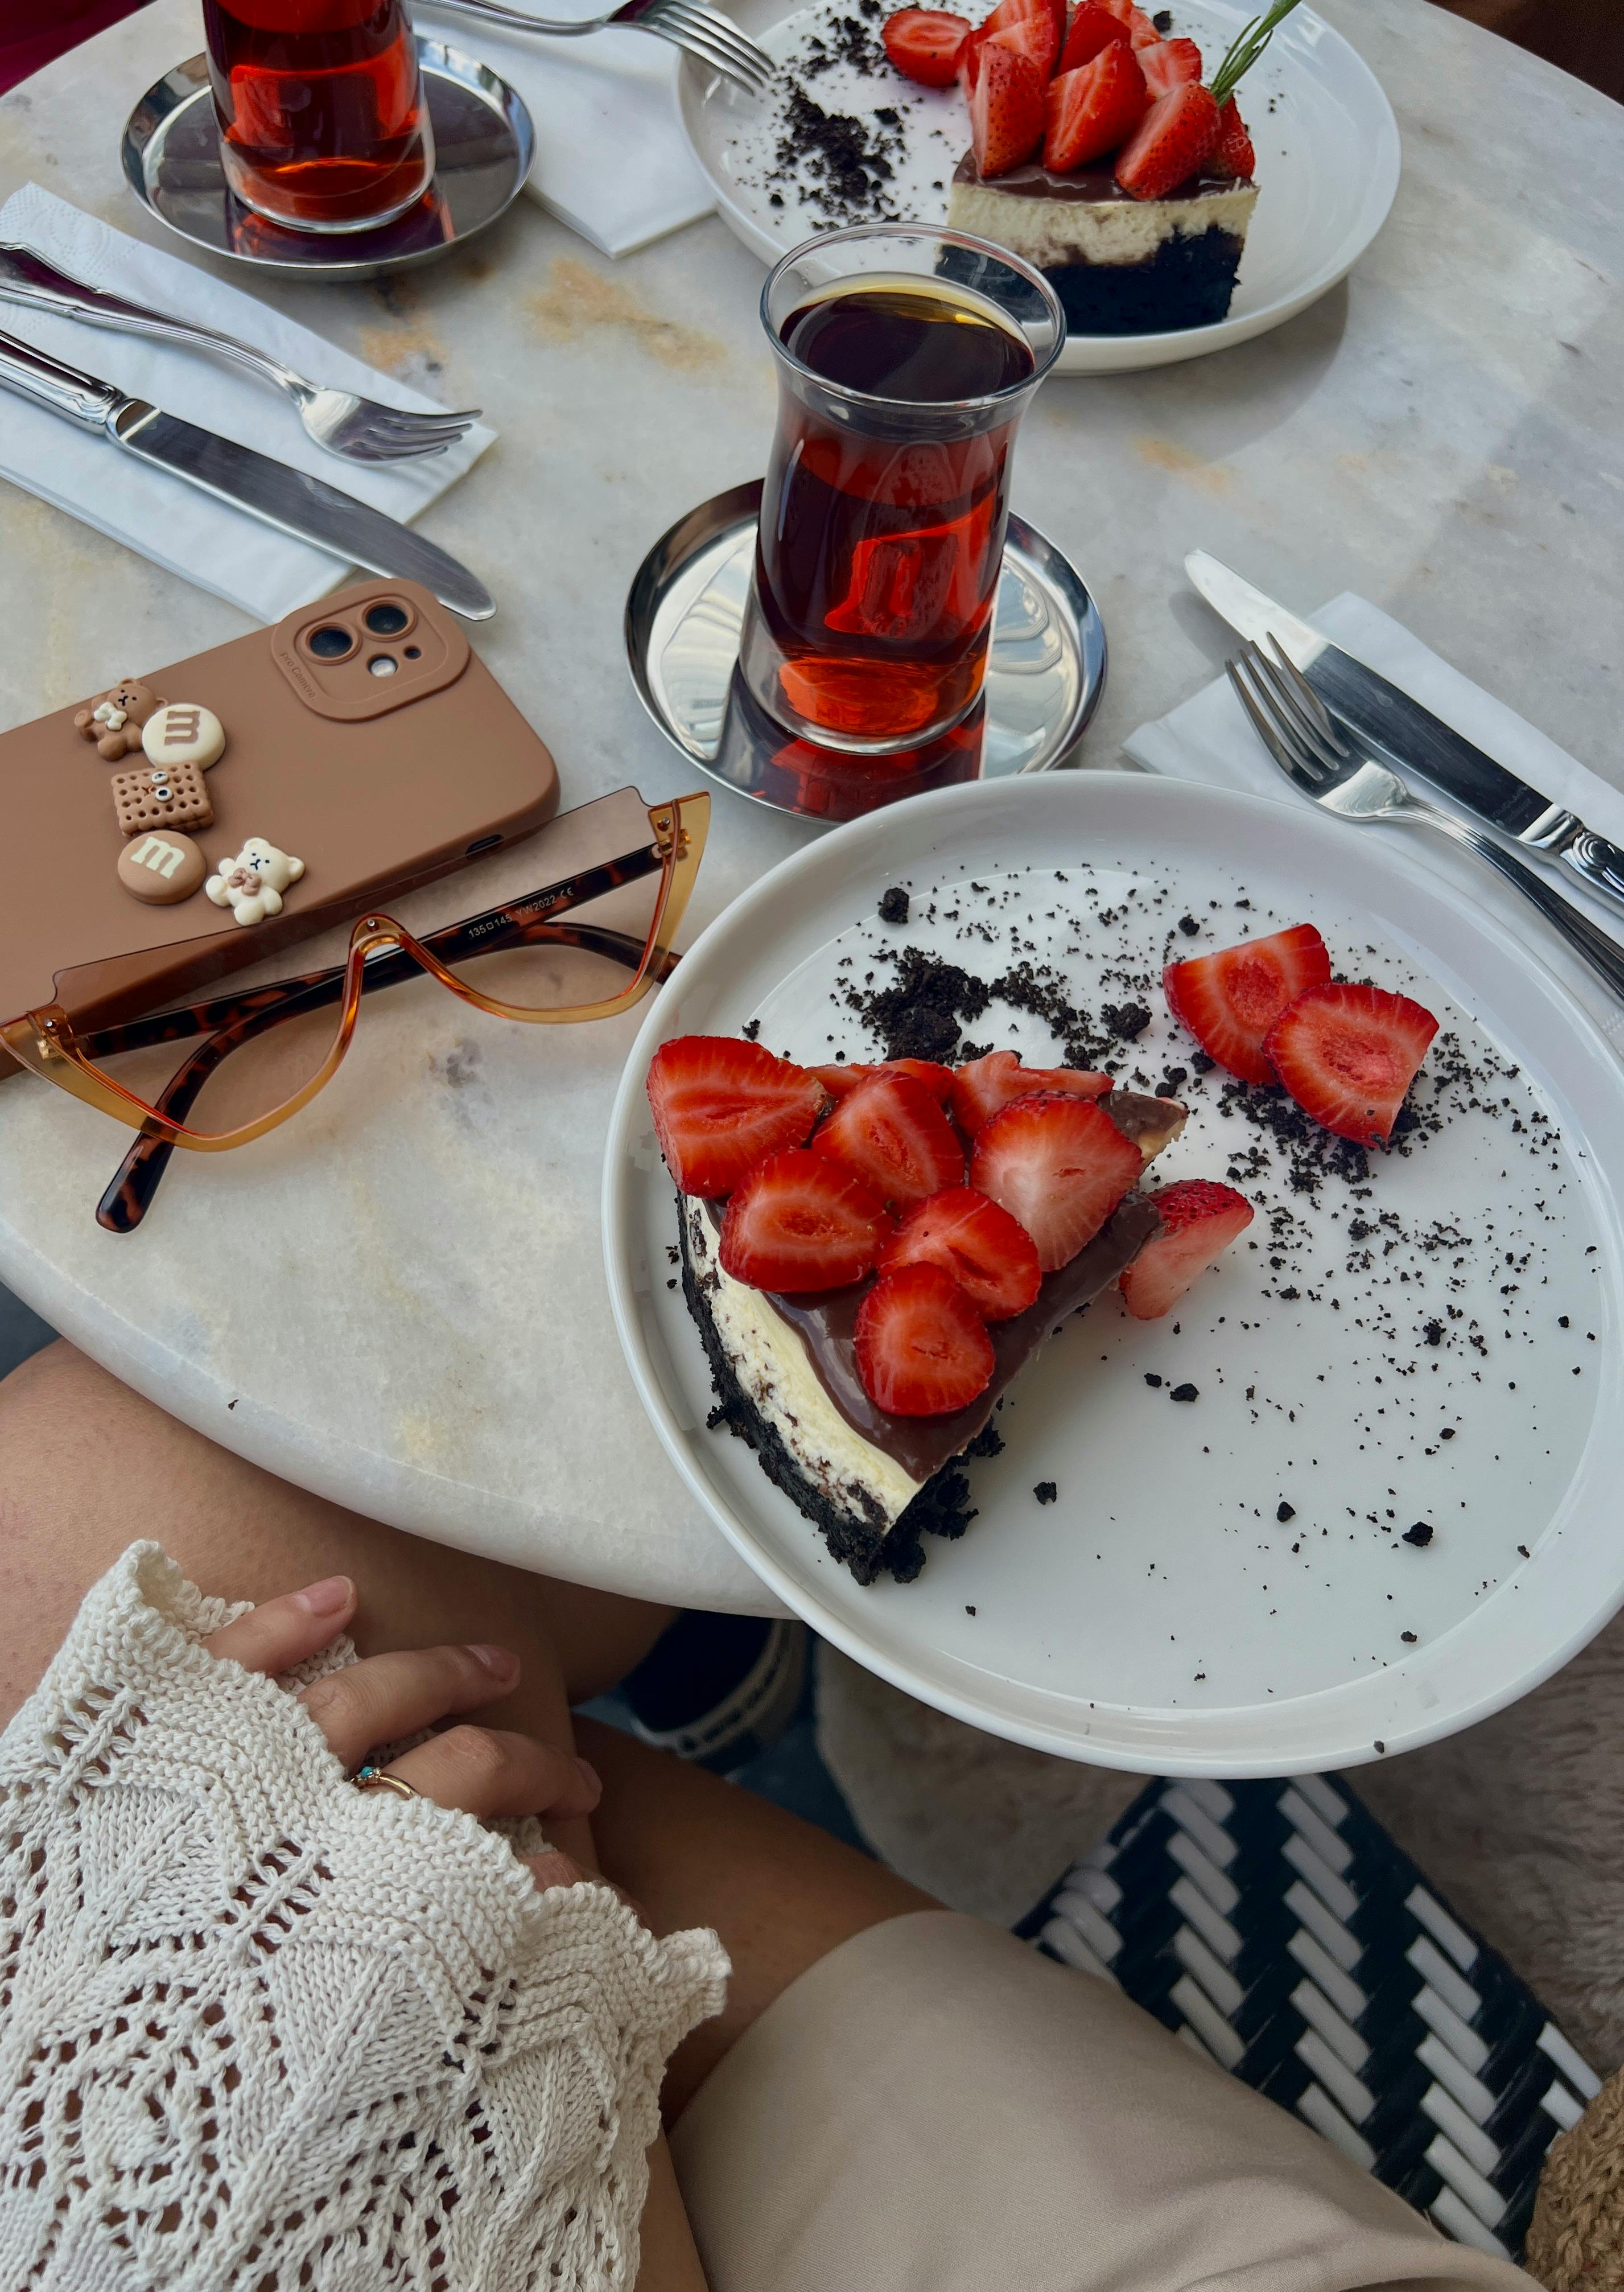 Someone eating a piece of cake with strawberries | Source: Pexels